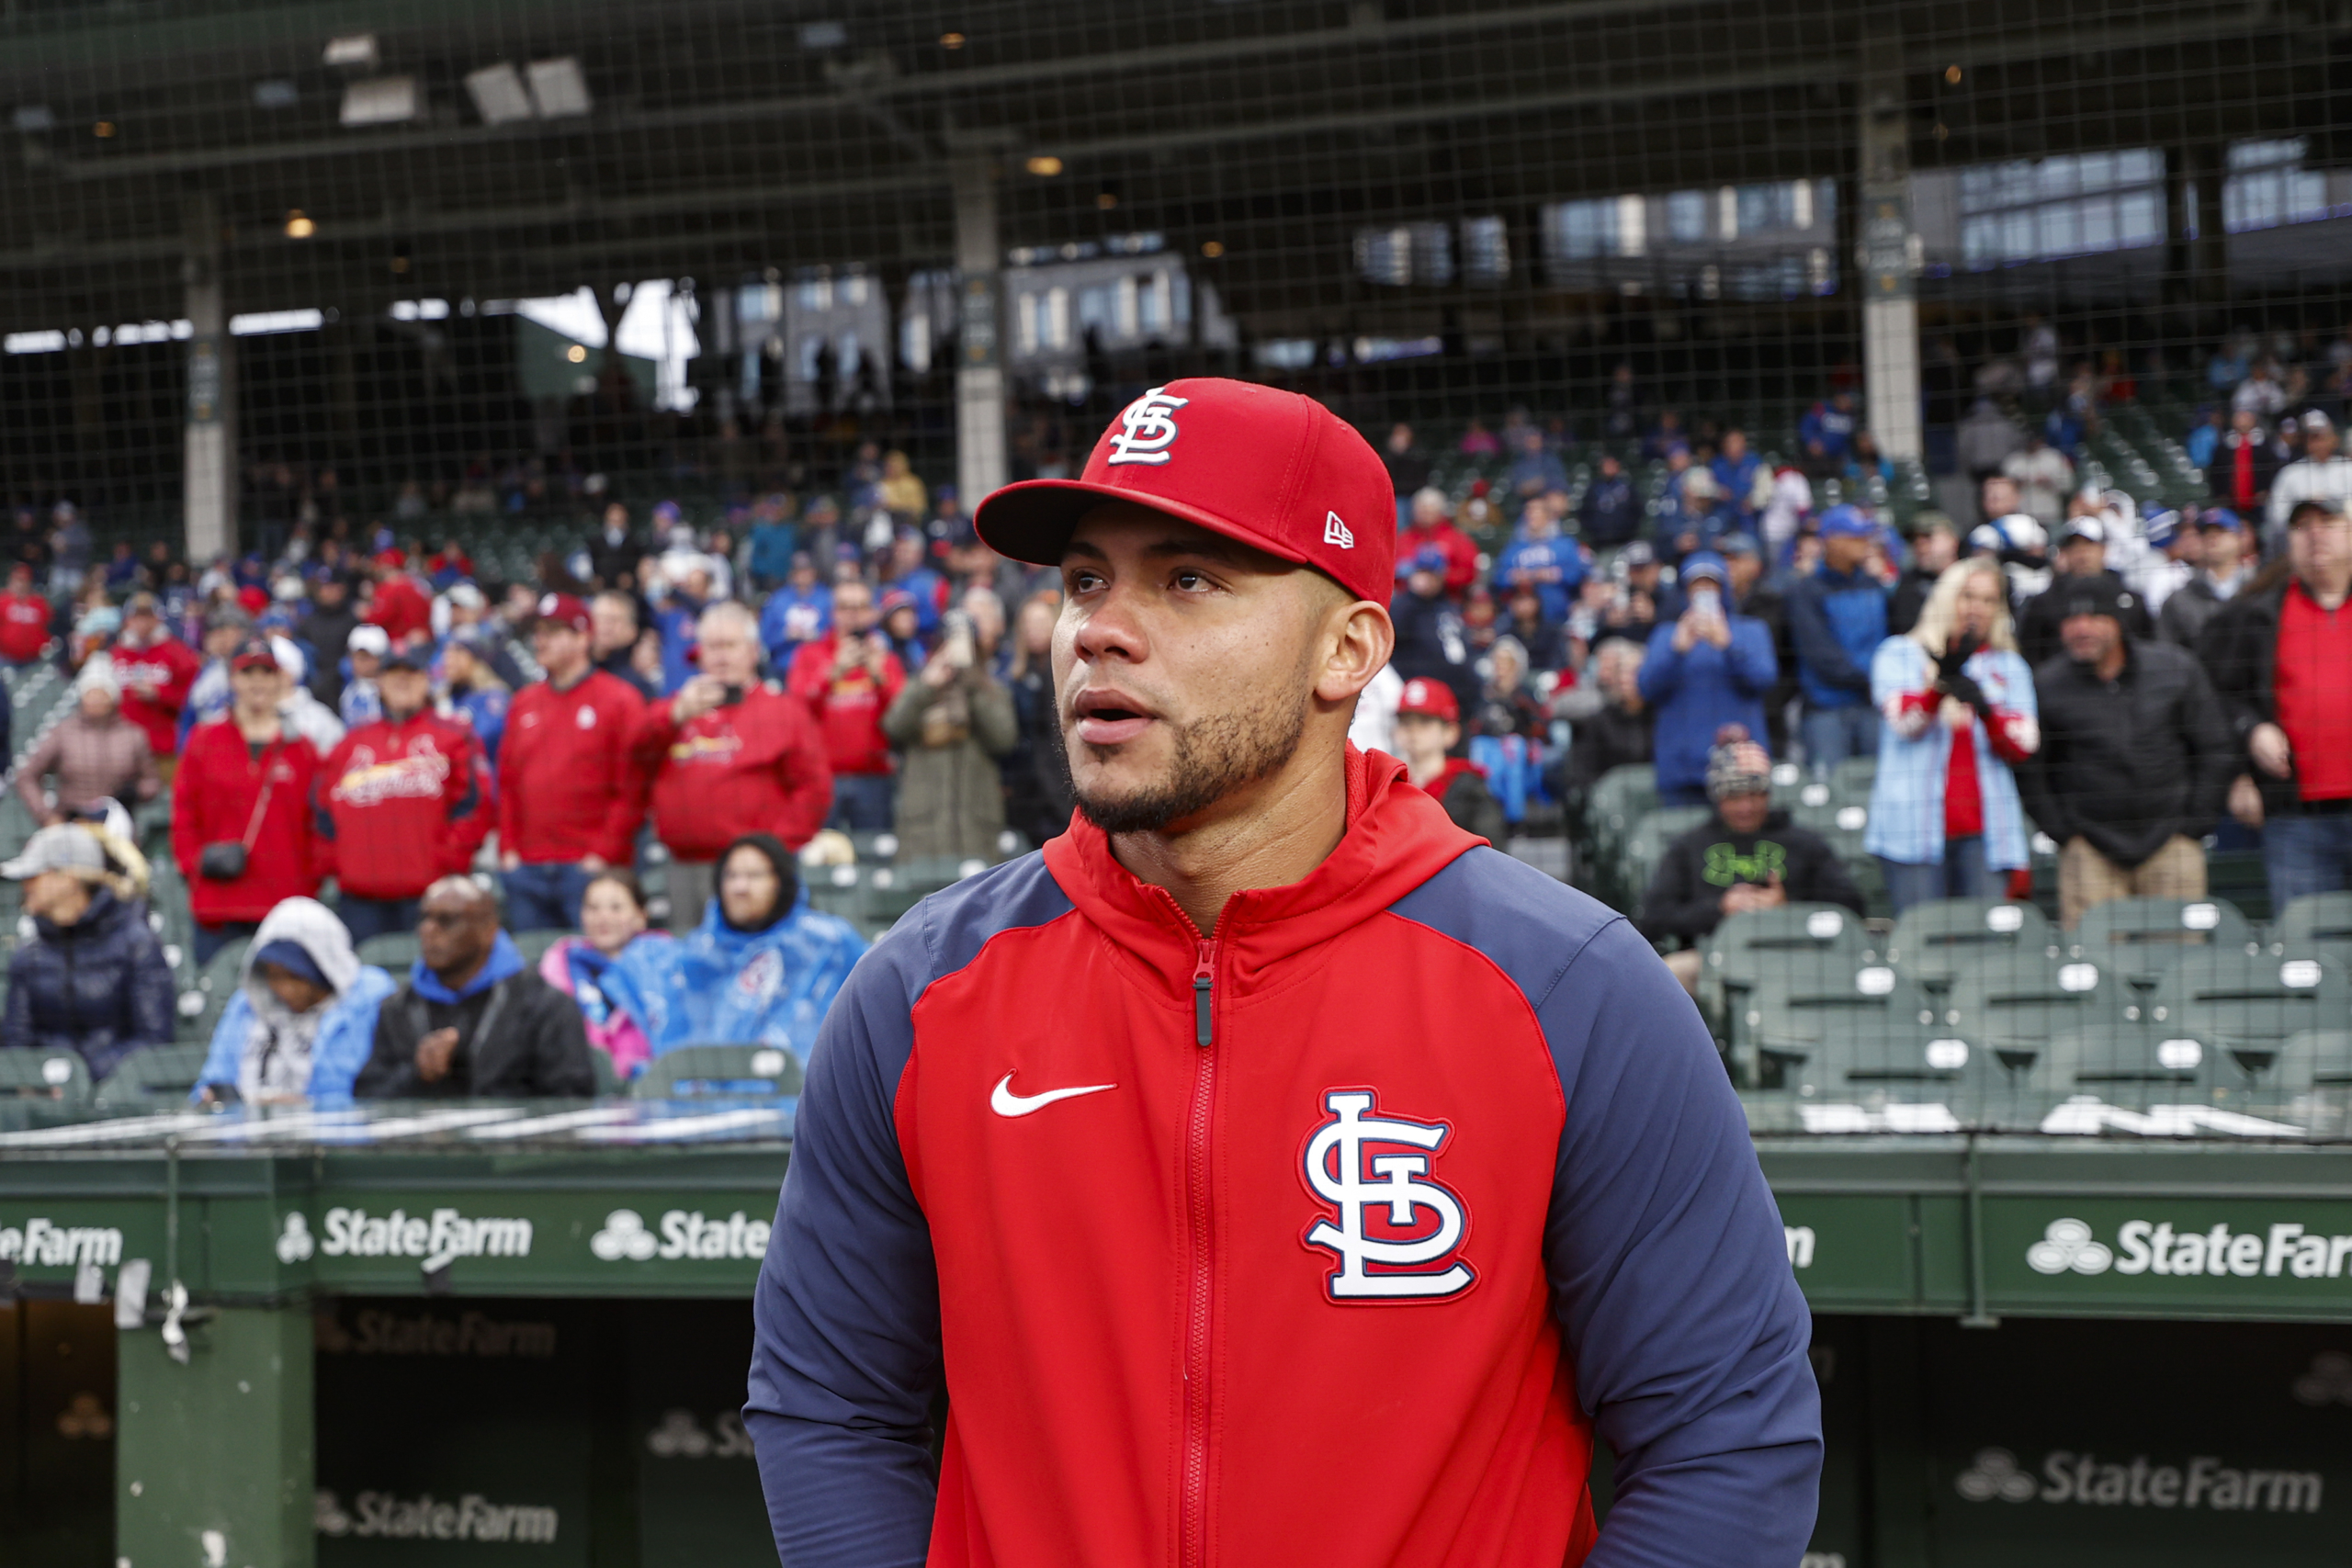 Cardinals: Is it time to panic about Willson Contreras?